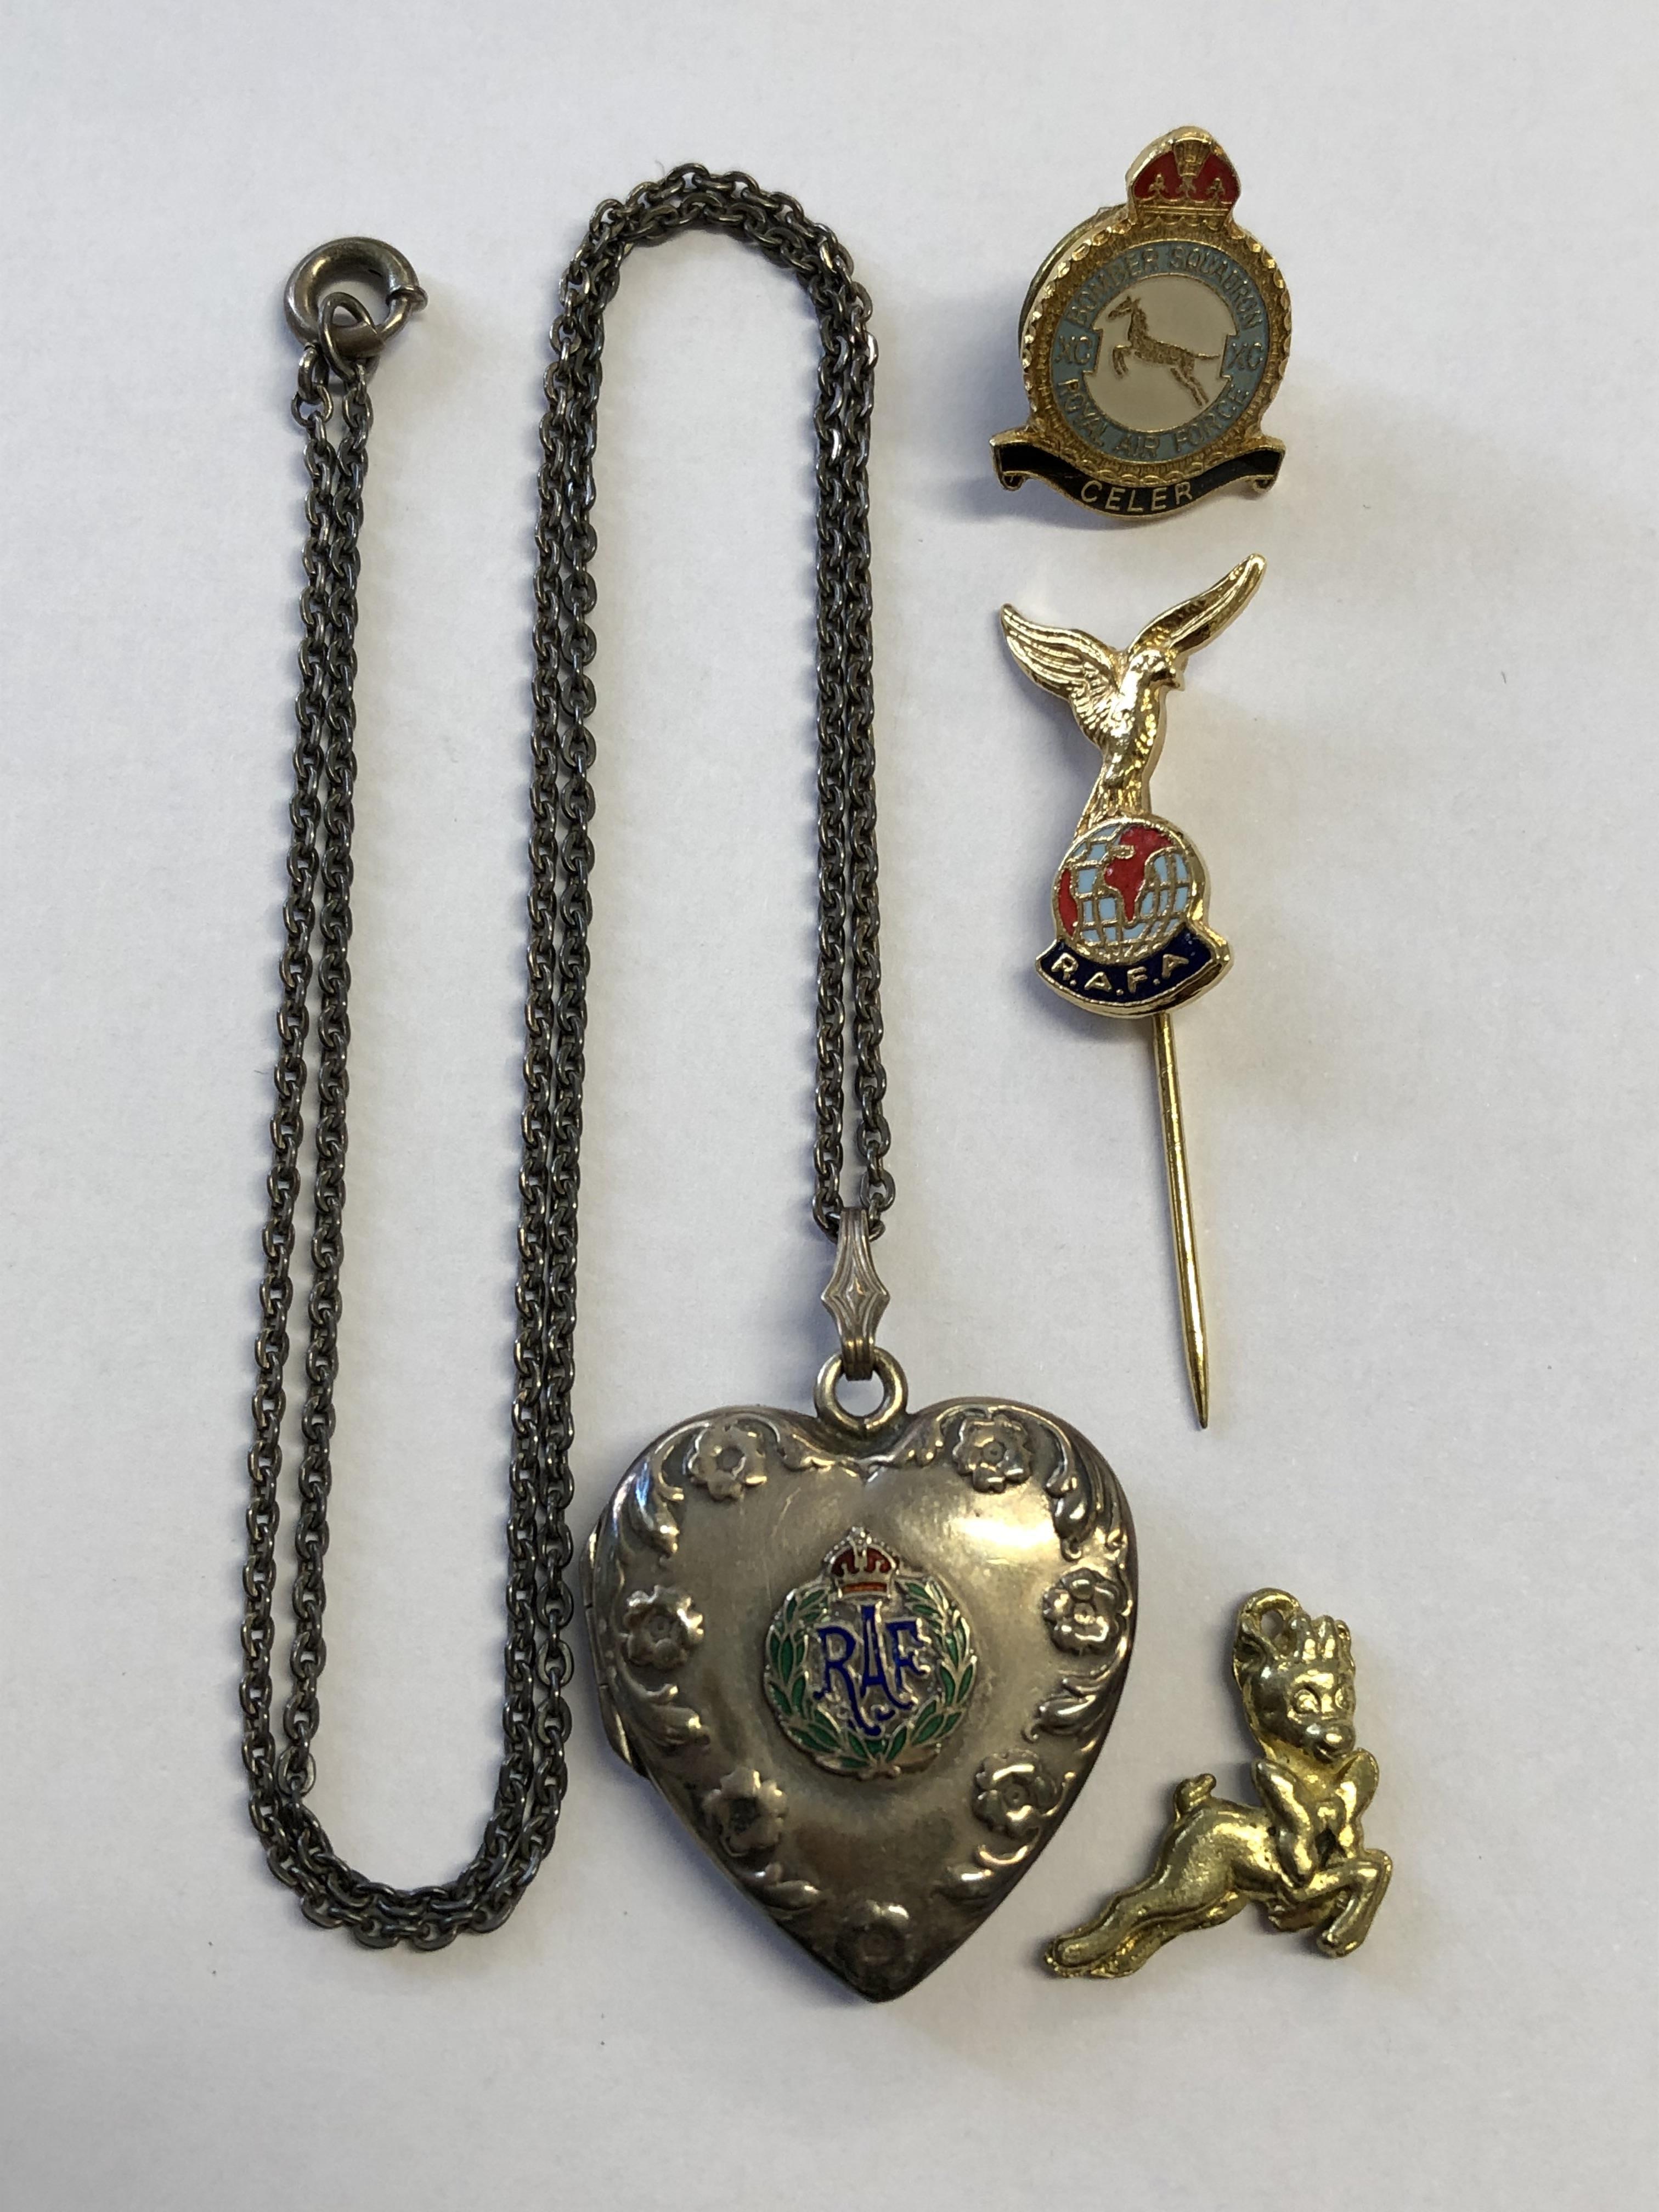 STERLING SILVER HEART SHAPED LOCKET ON TRACE CHAIN WITH ENAMELLED RAF INSIGNIA AND RAF LAPEL BADGES